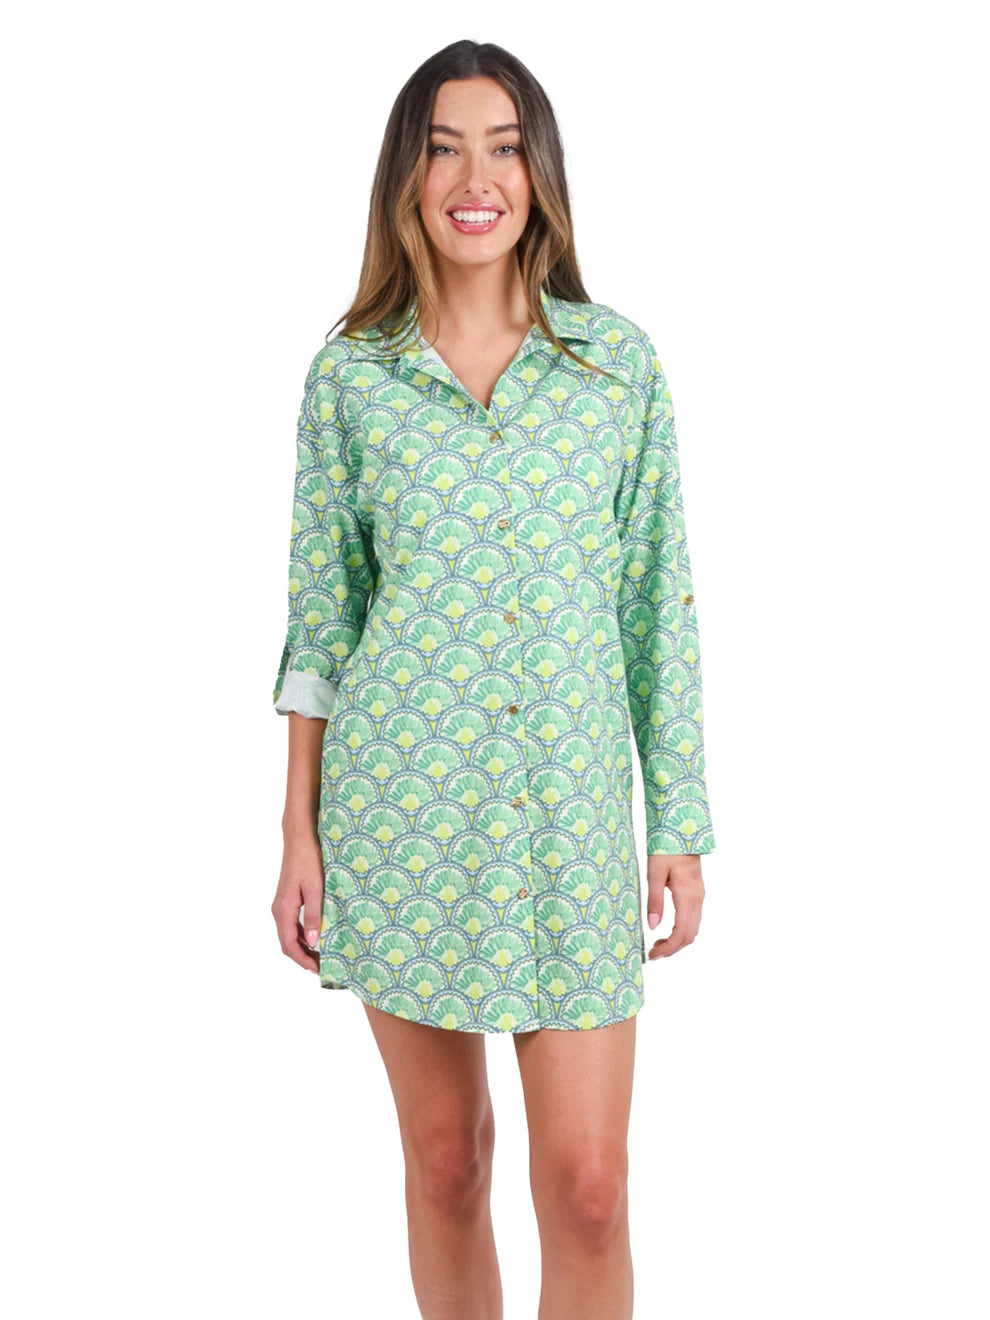 Emily McCarthy Deco Palm Classic Coverup